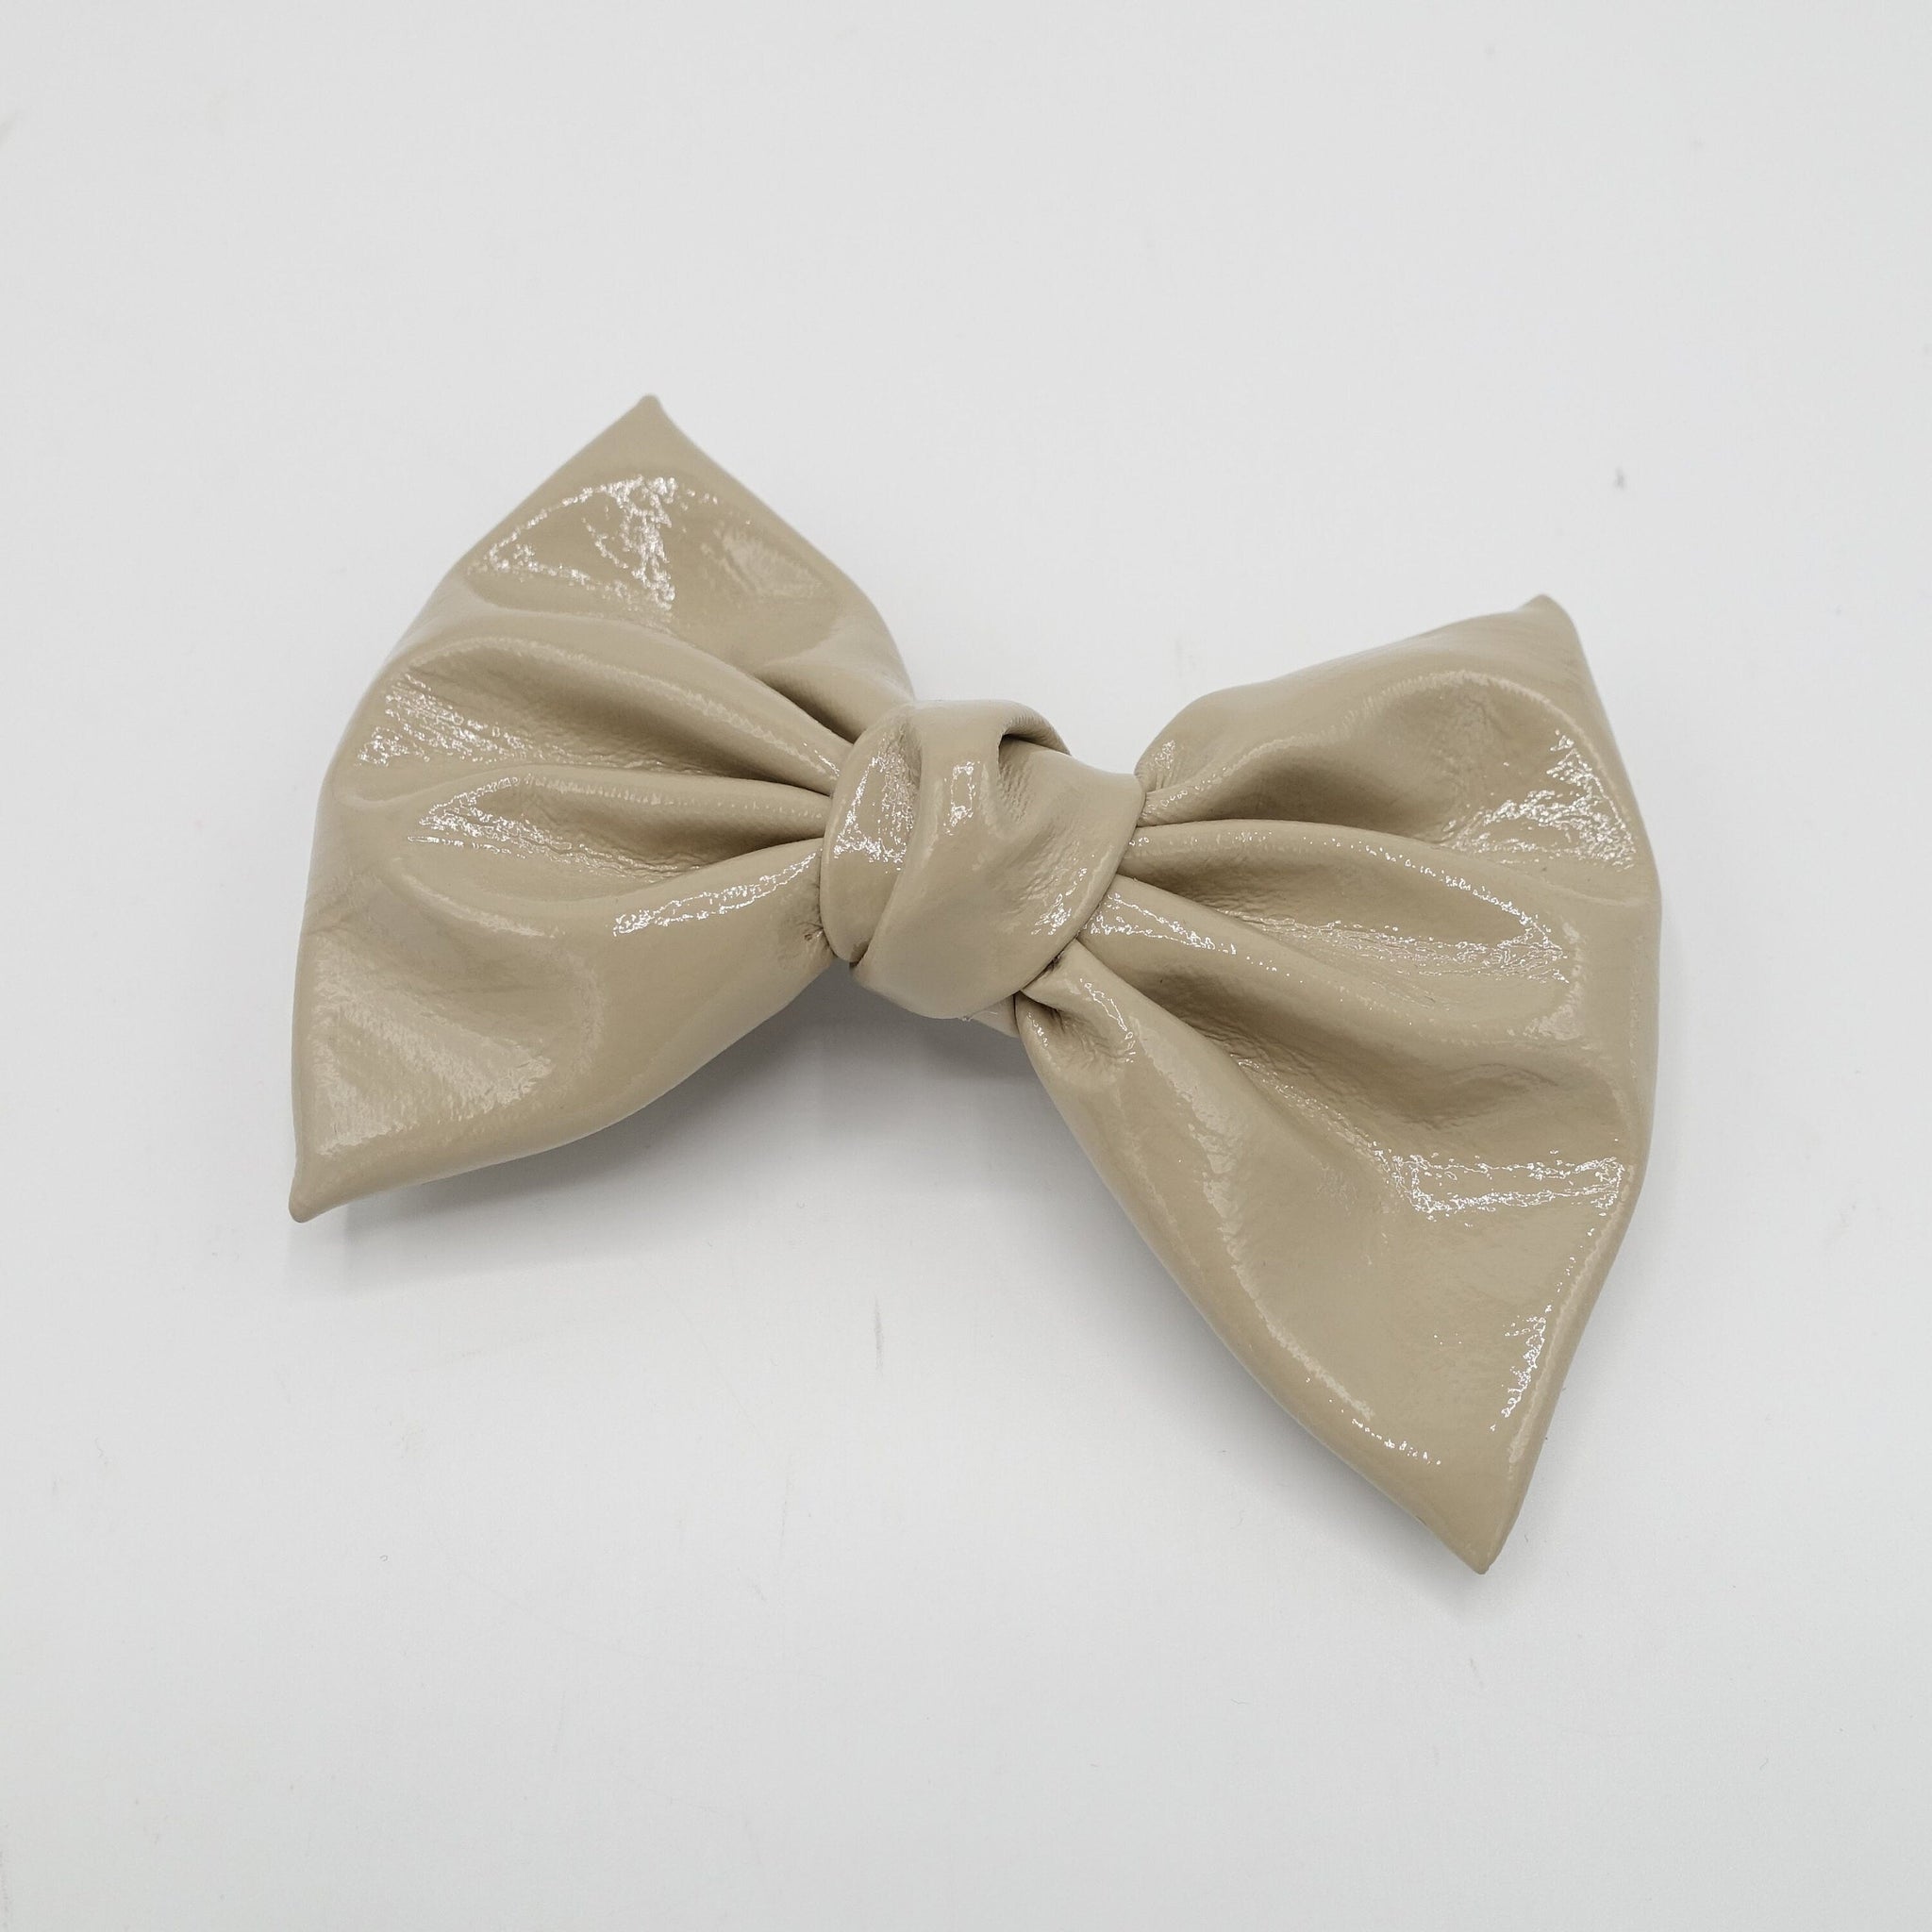 veryshine.com Barrette (Bow) glossy patent leather hair bow barrette casual hair accessory for women